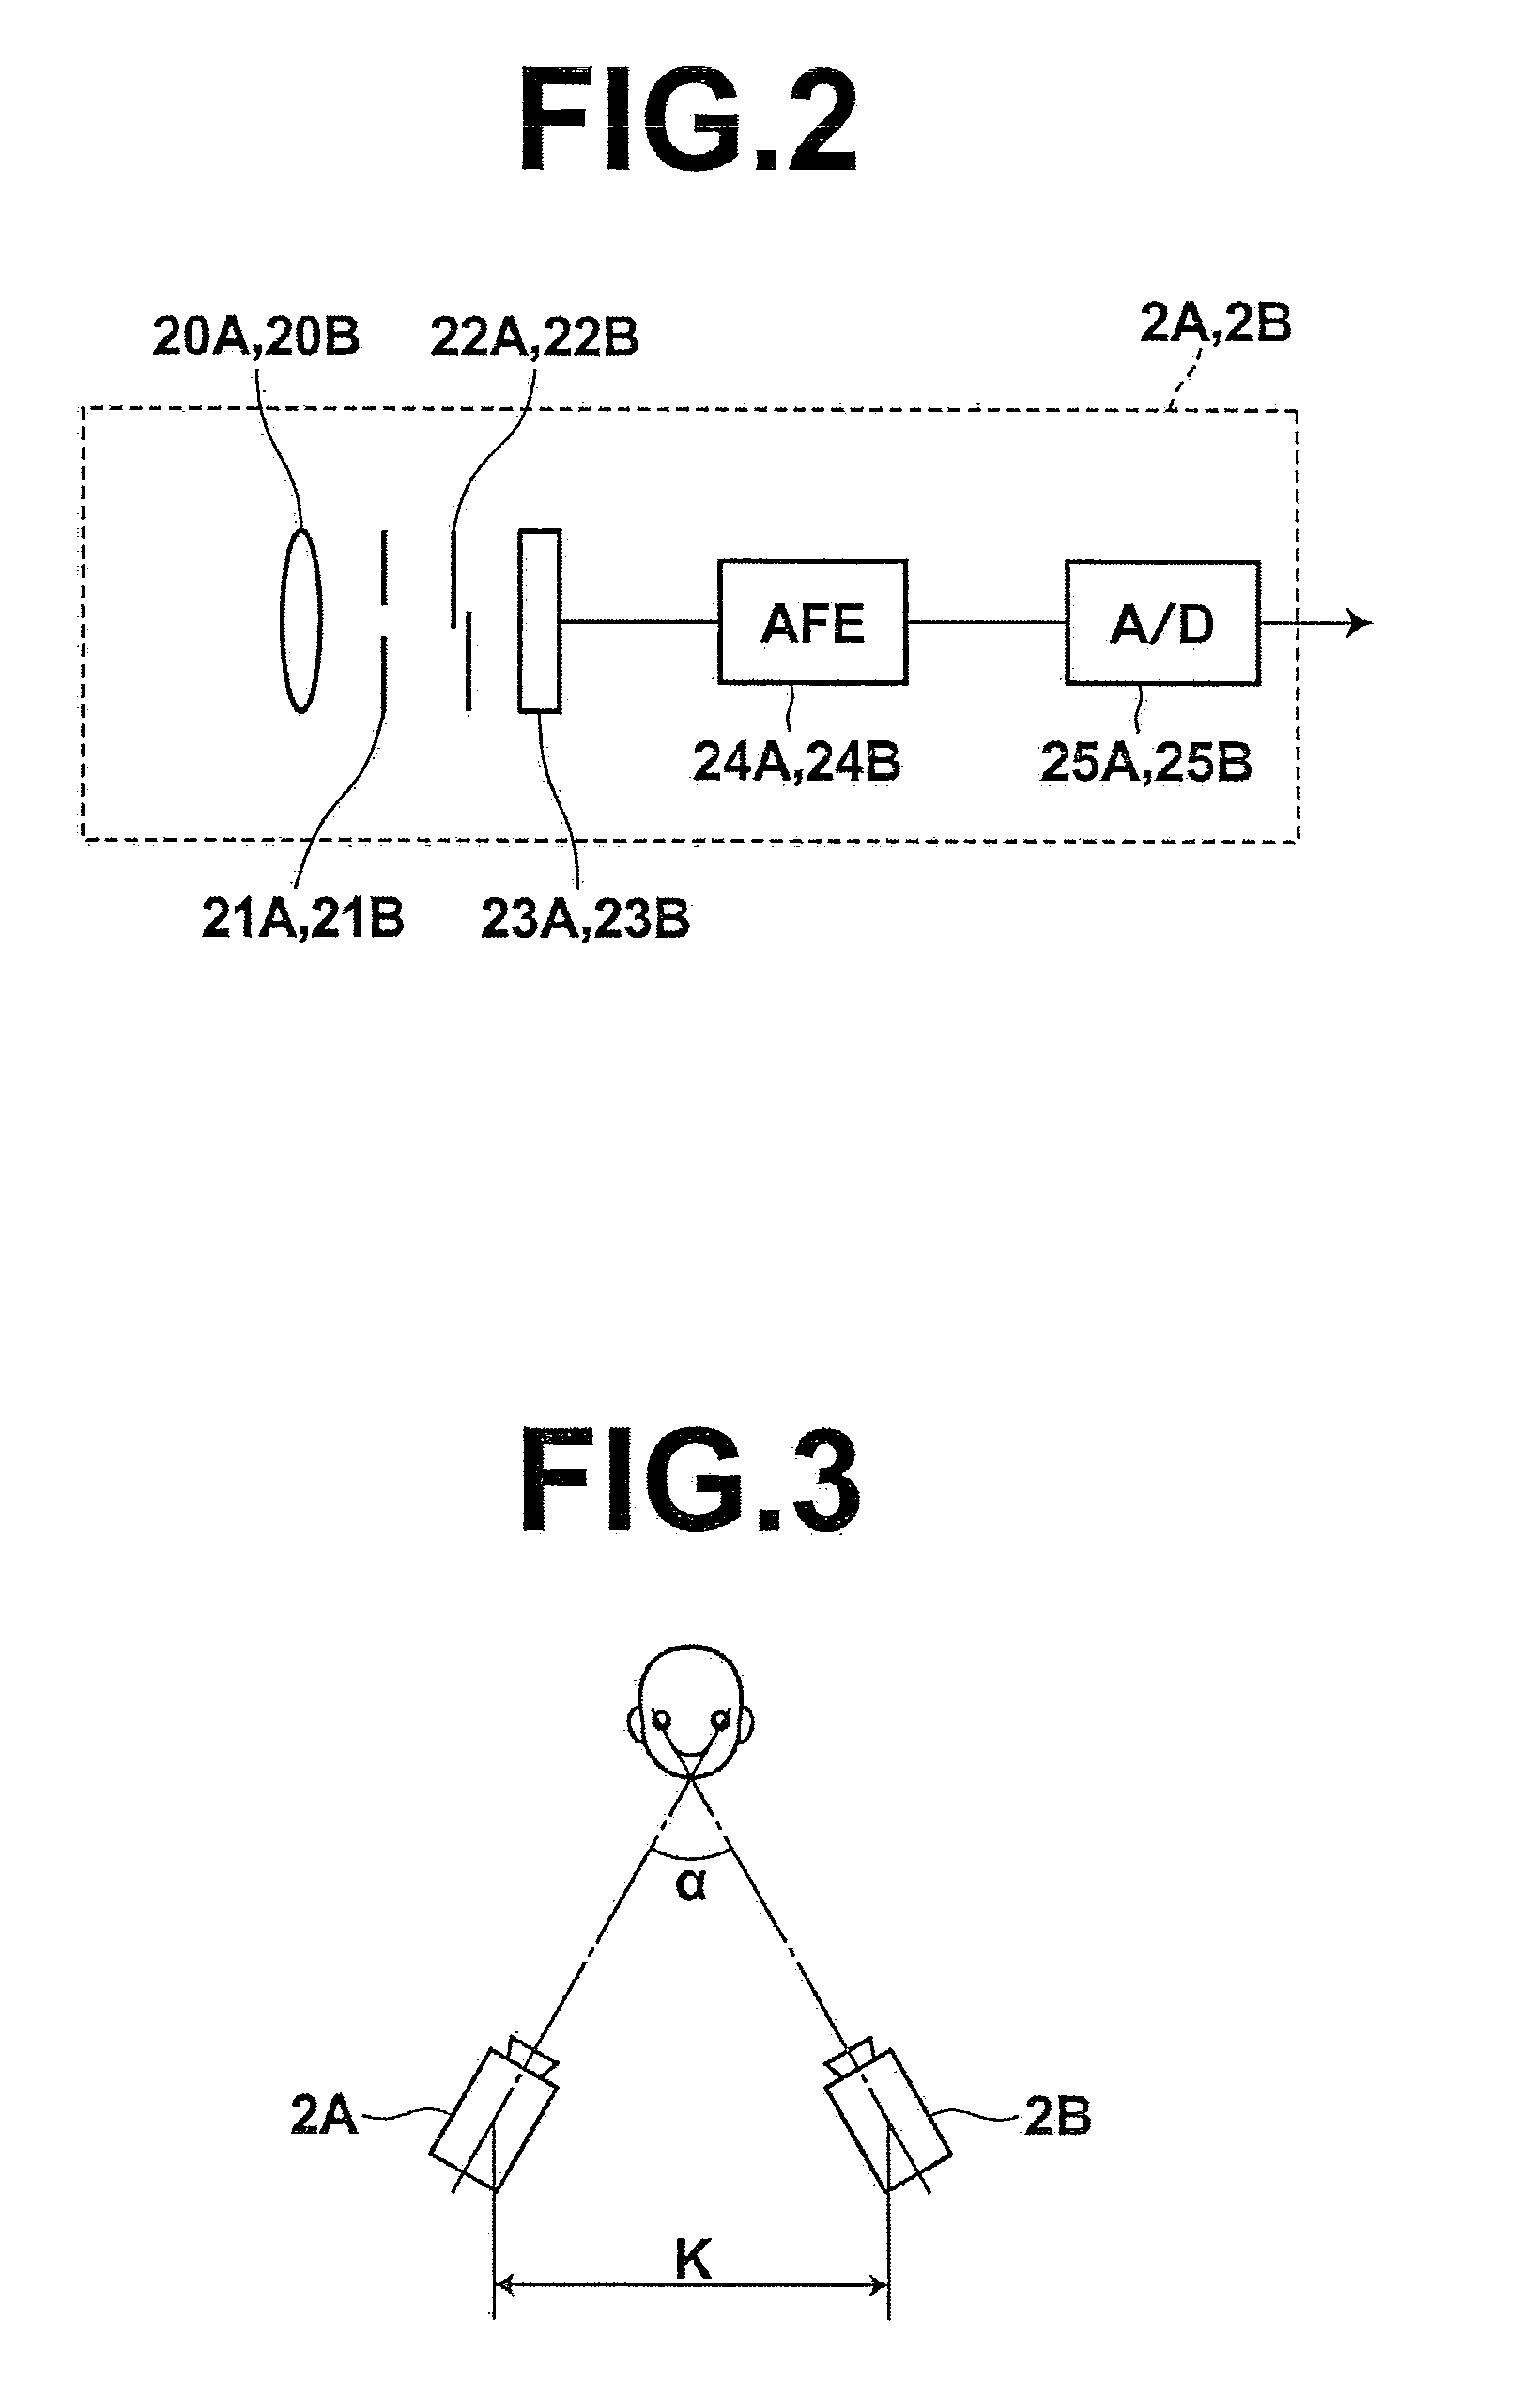 Image display apparatus and method, as well as program